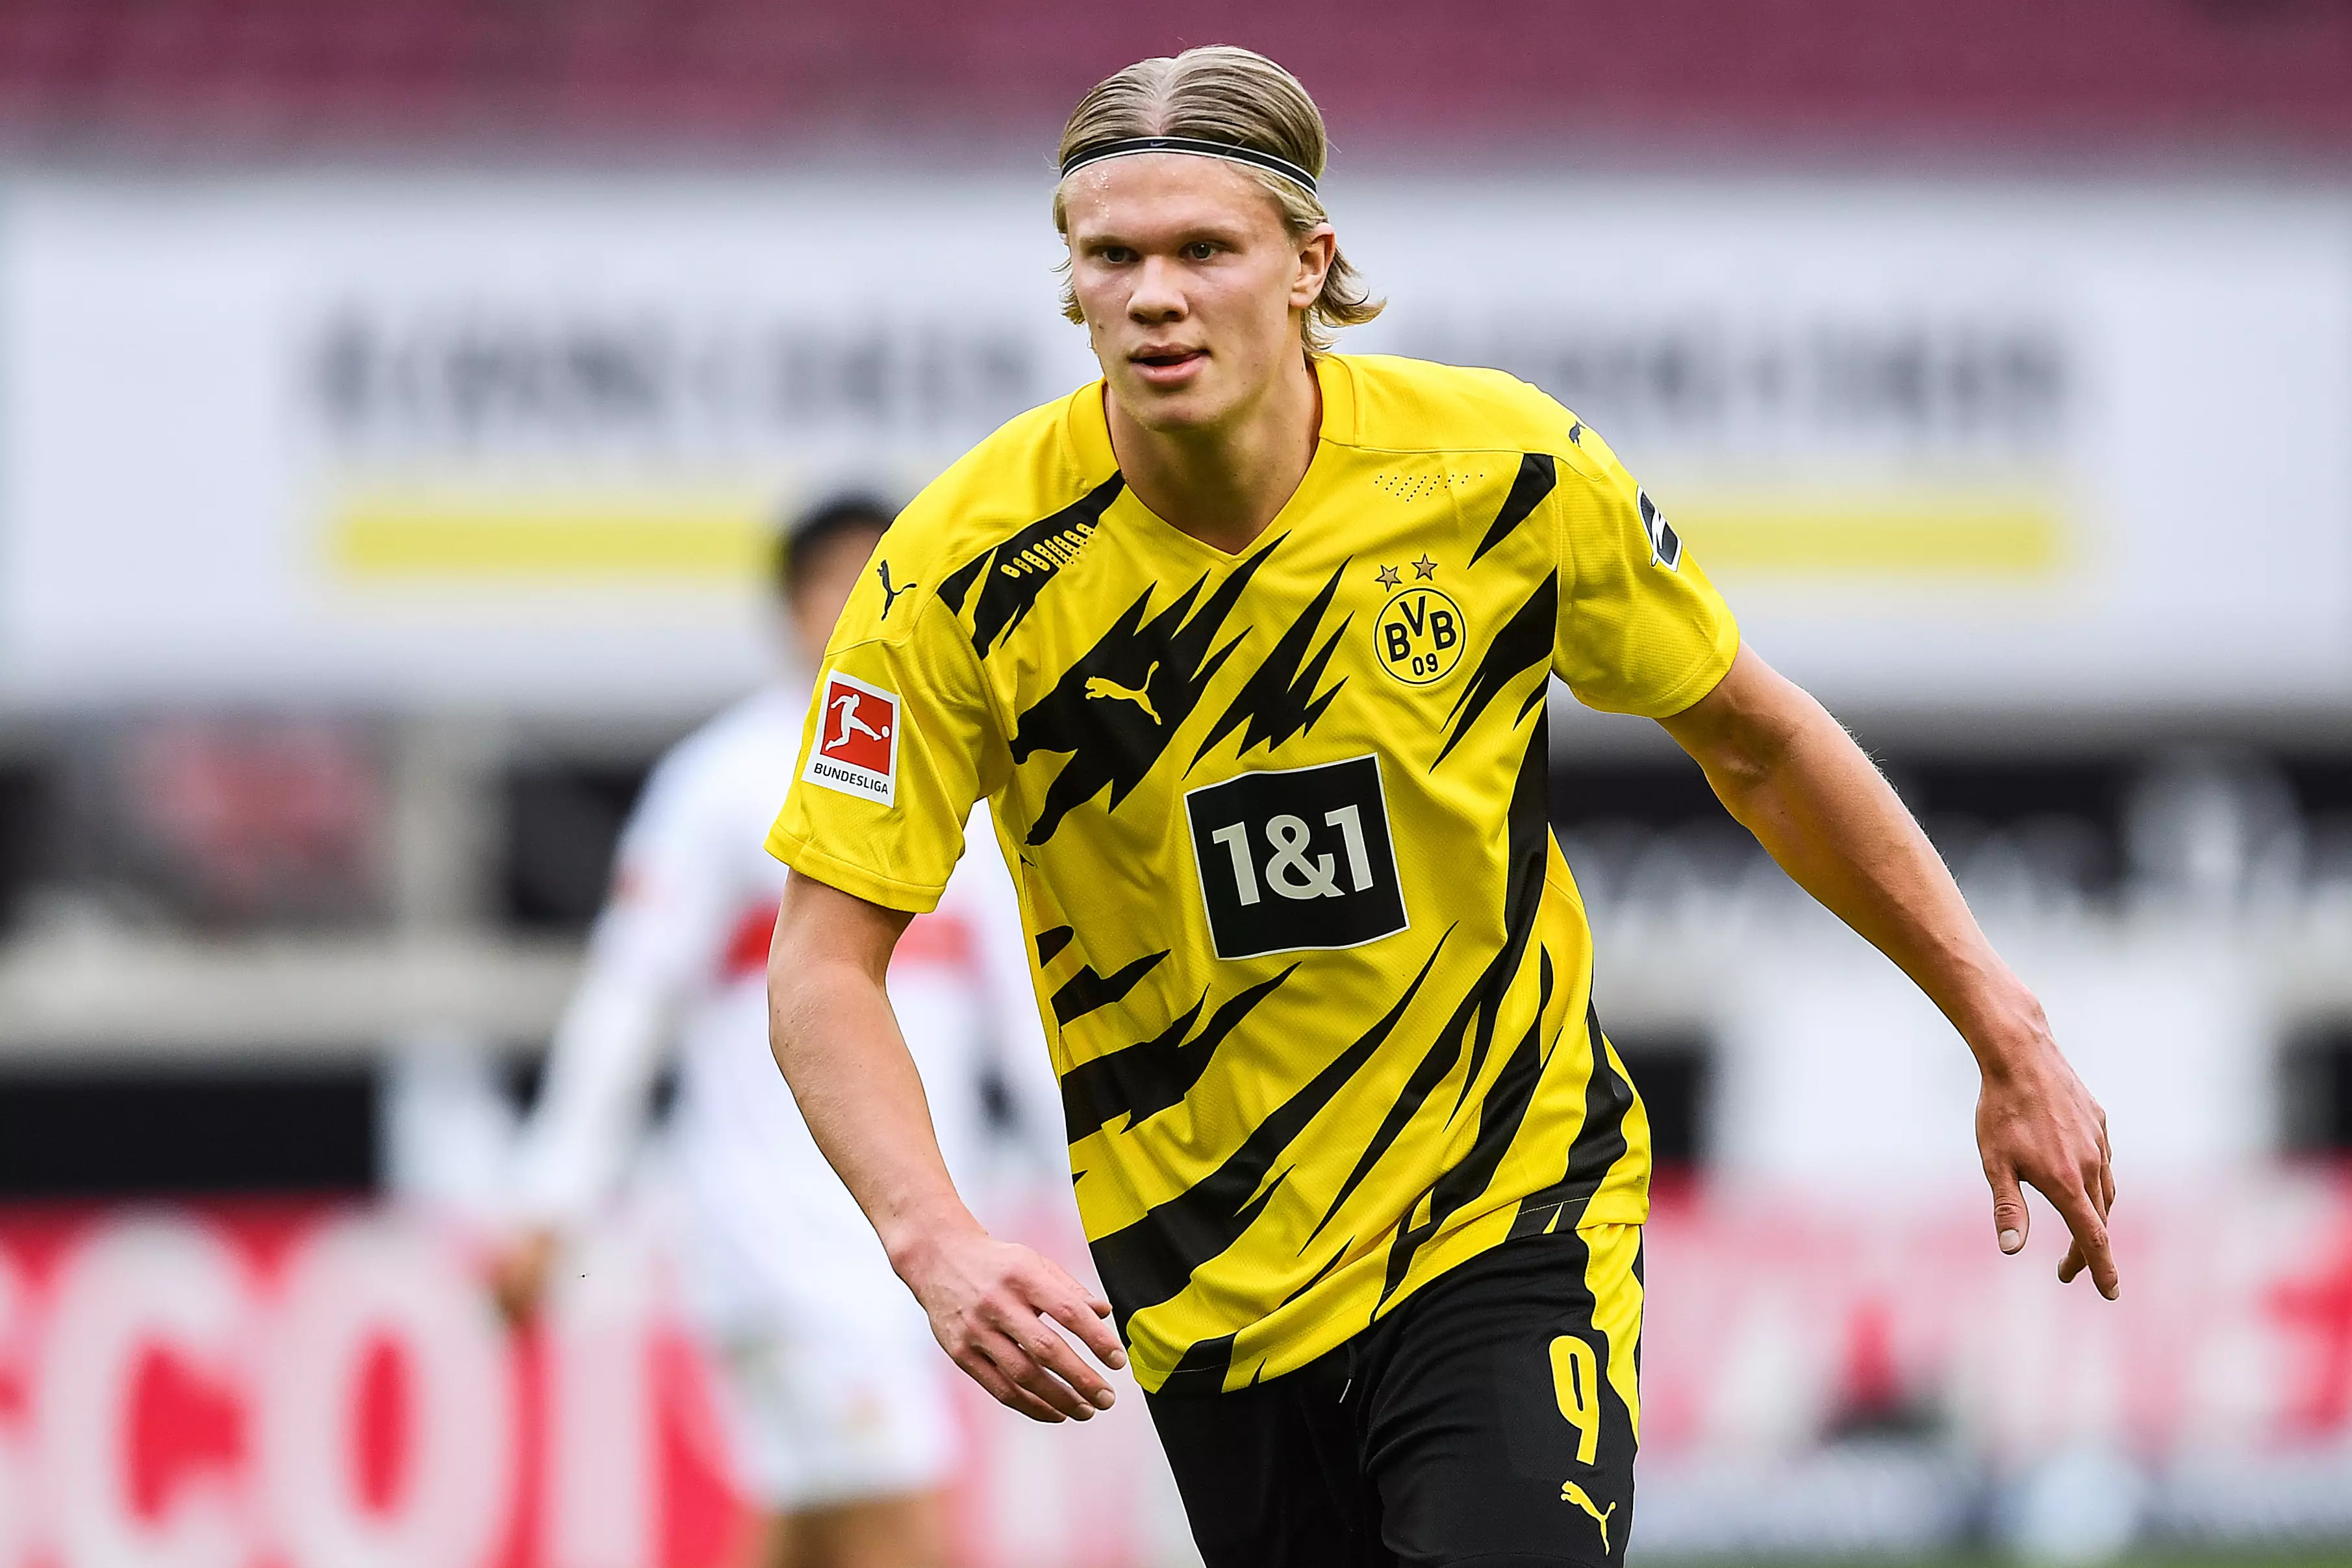 Sancho's teammate Erling Haaland could move this summer. Image: PA Images